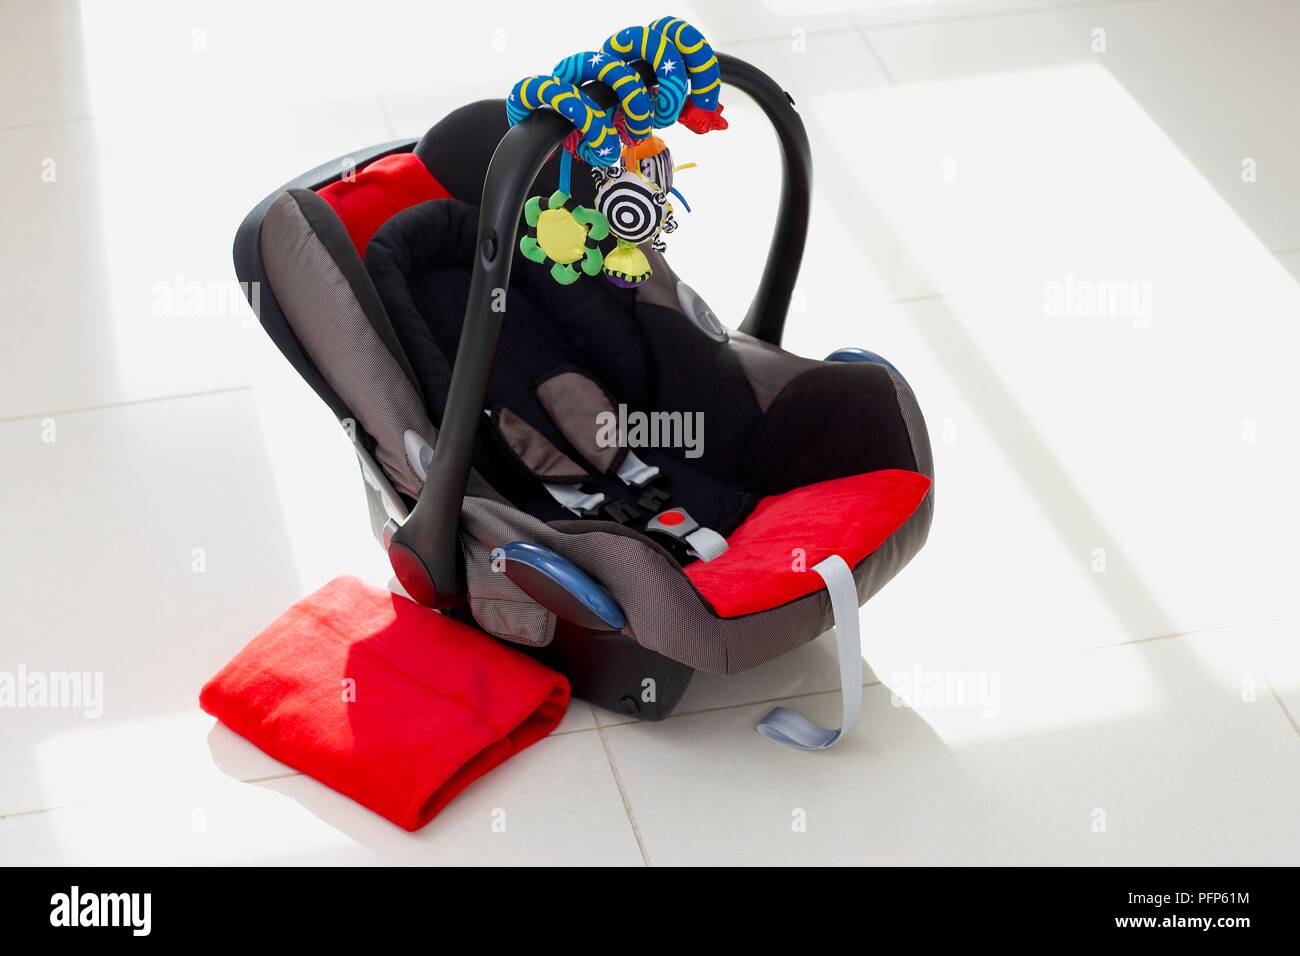 Baby car seat and folded blanket on floor Stock Photo